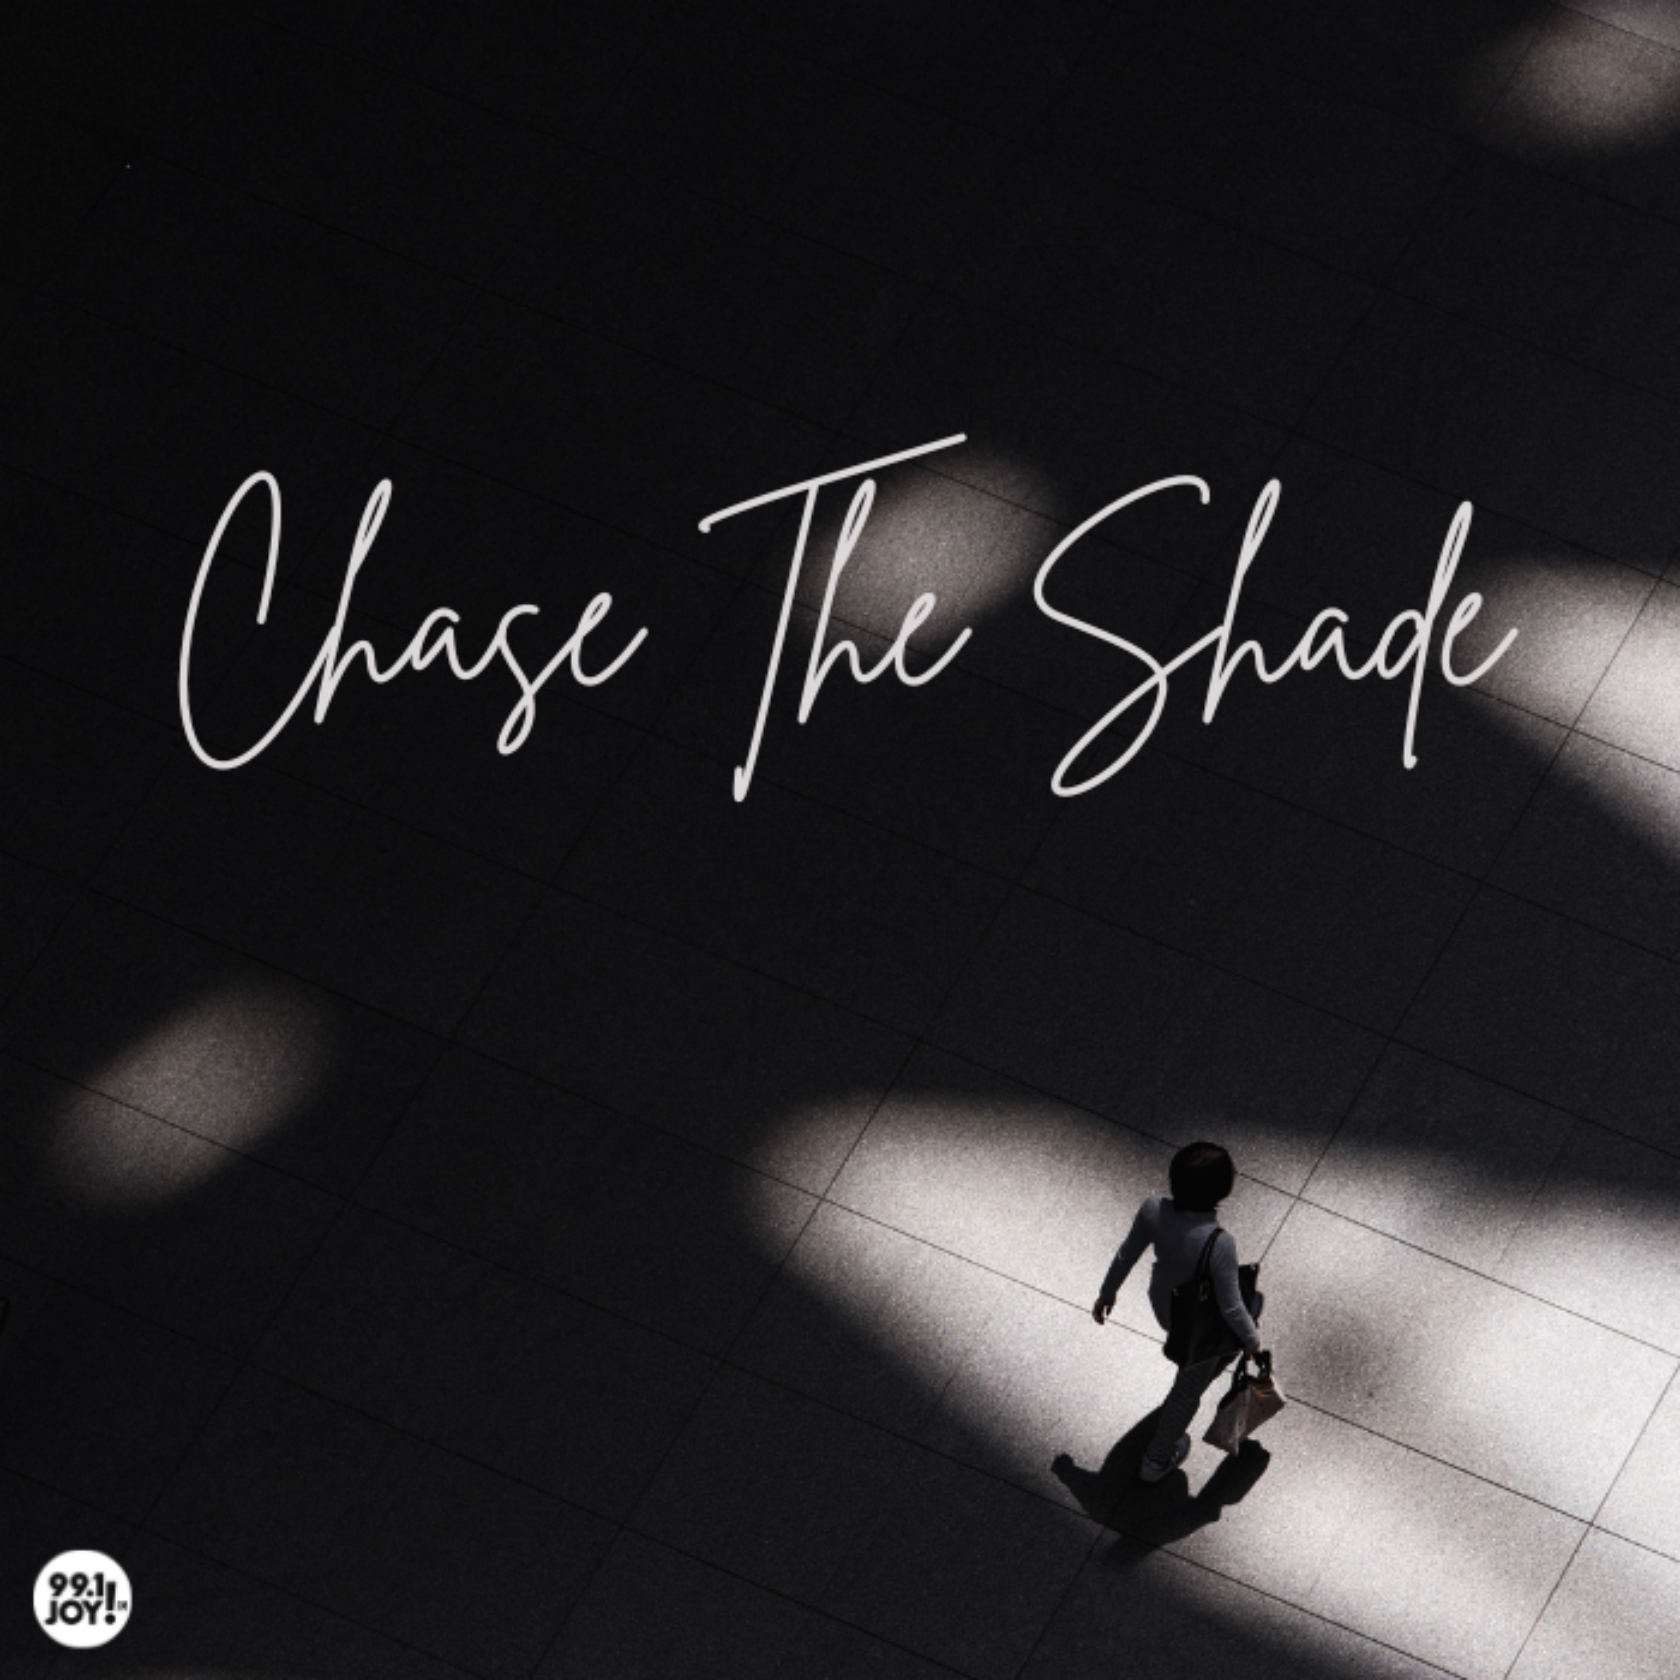 Chase The Shade